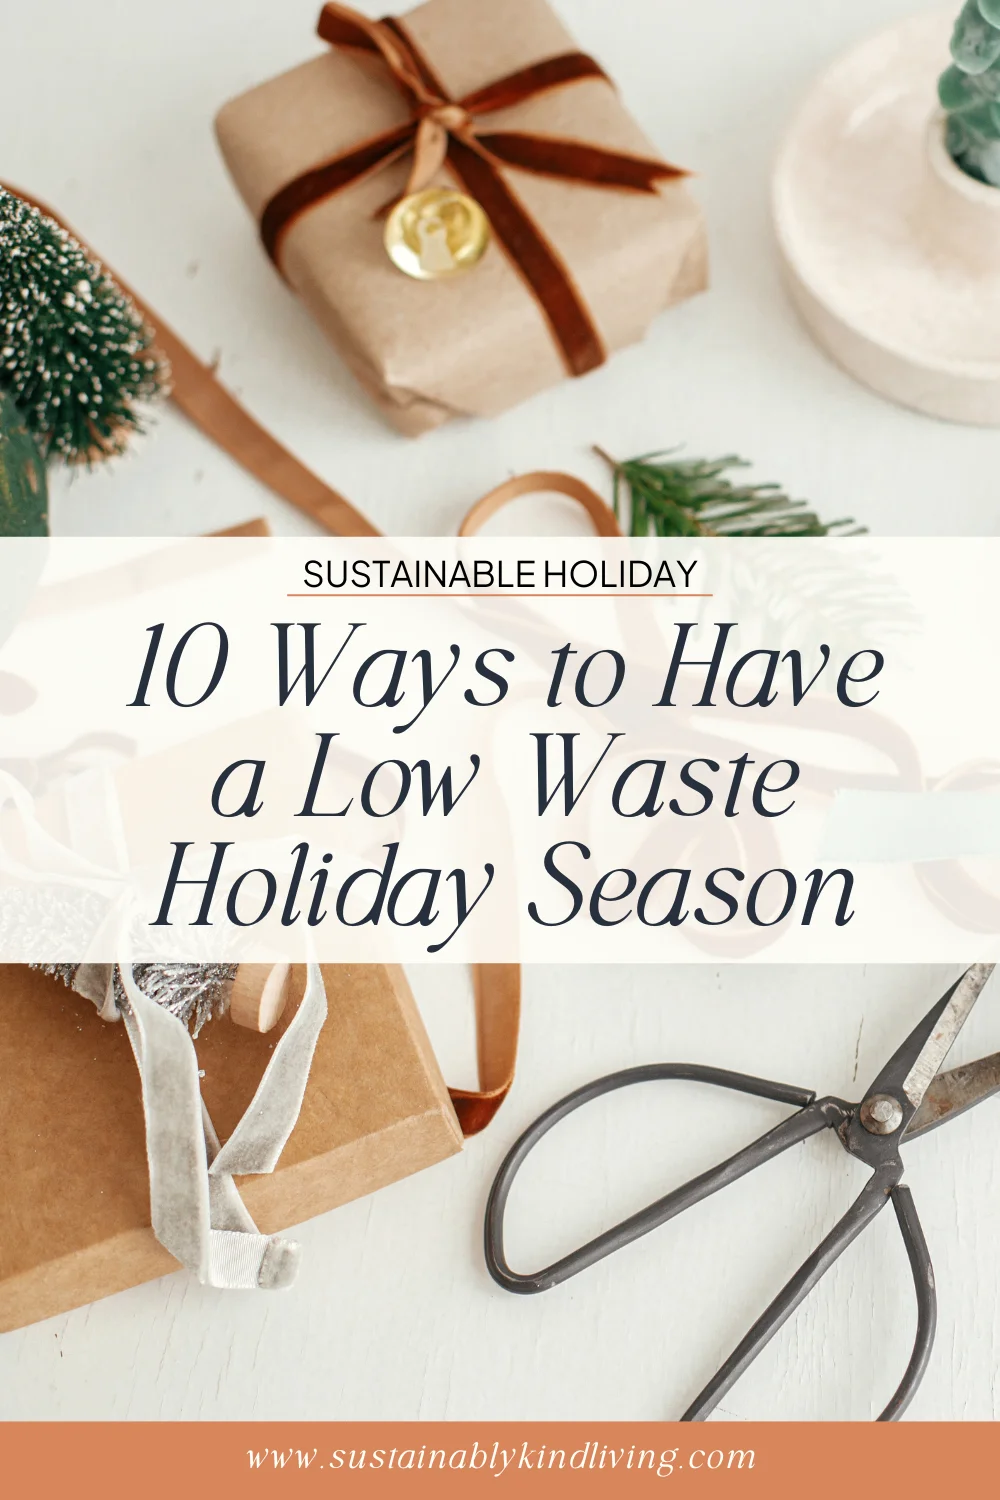 Sustainable holiday practices